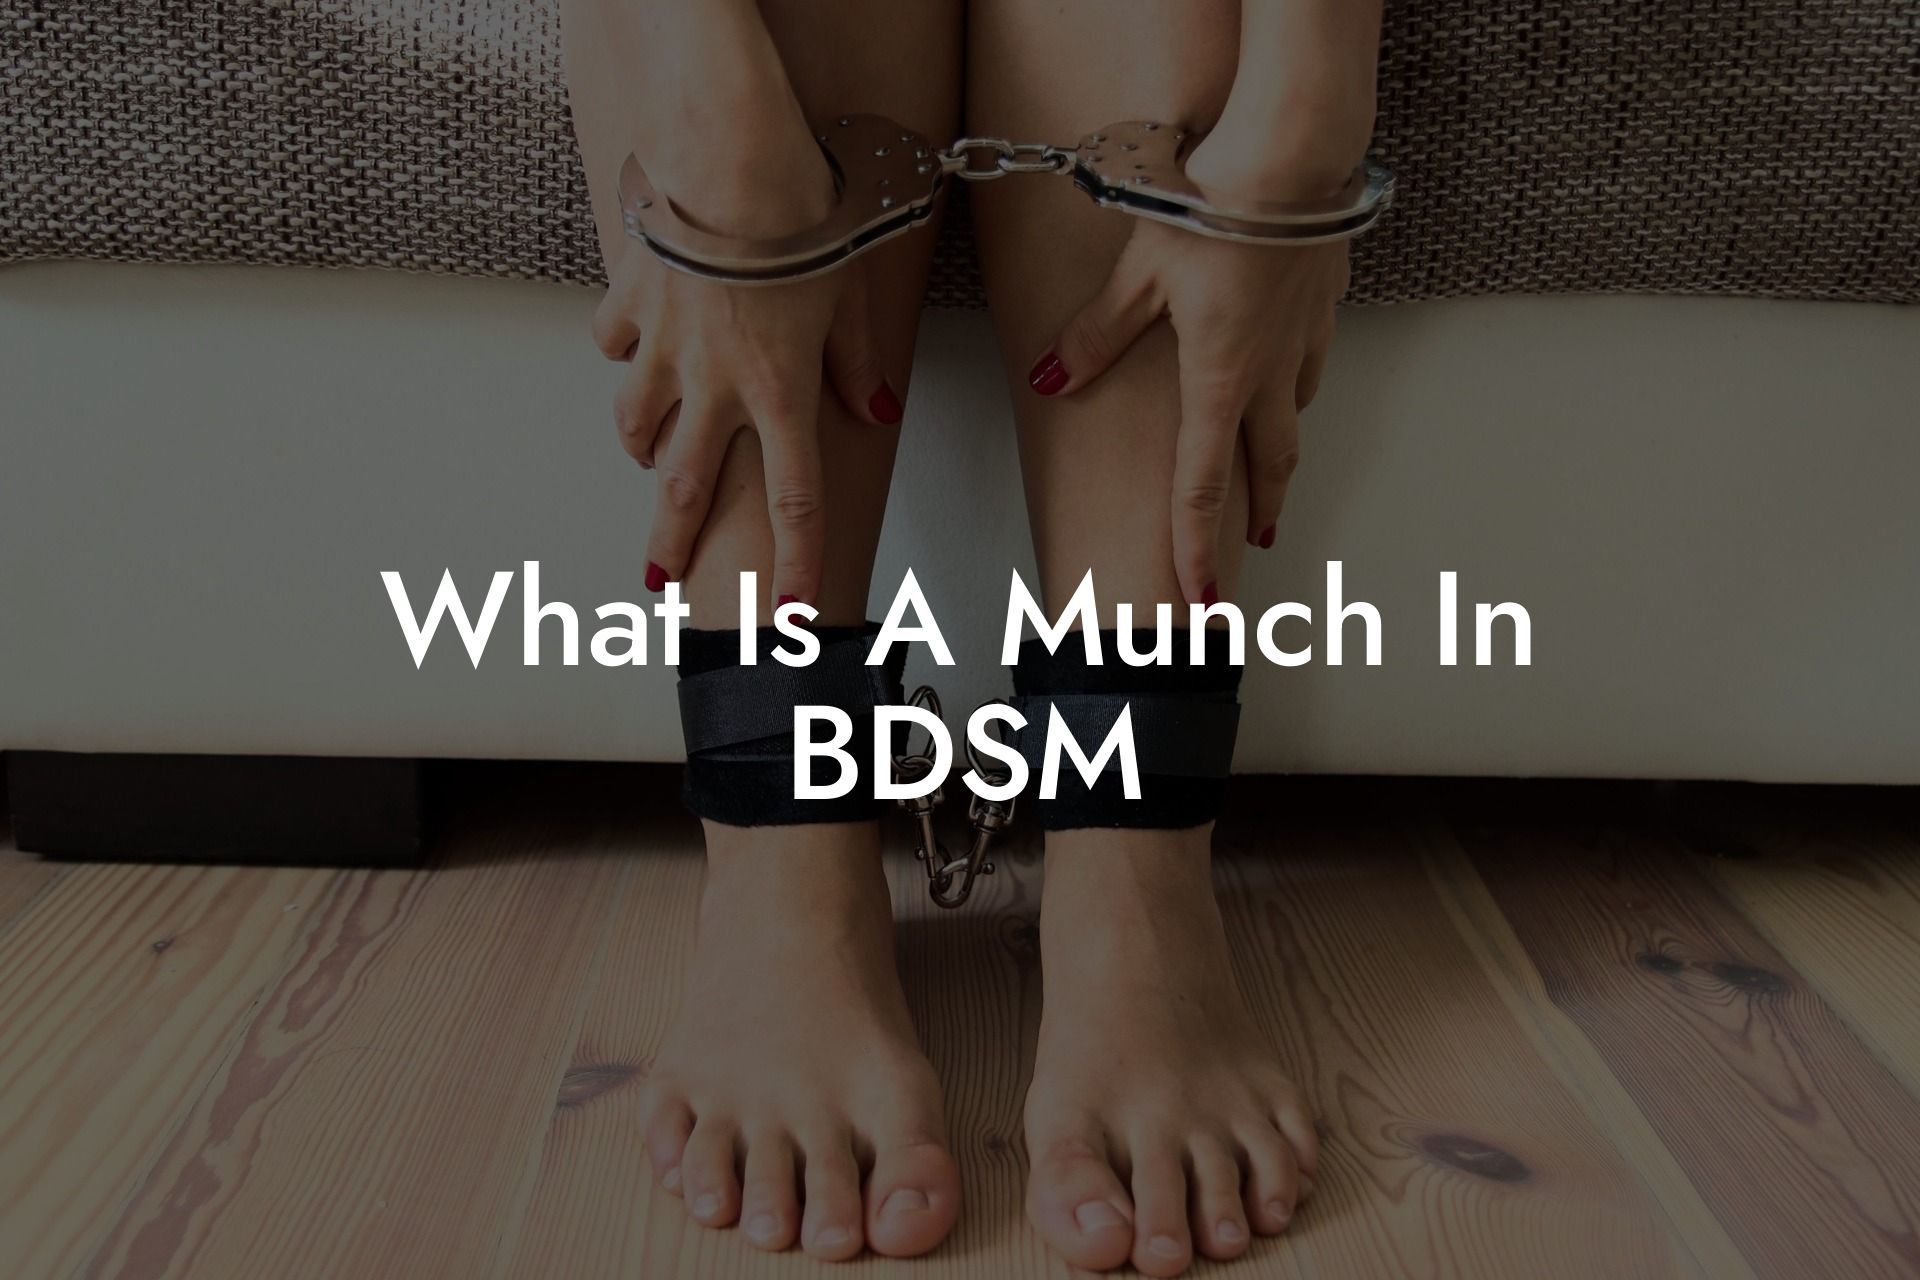 What Is A Munch In BDSM